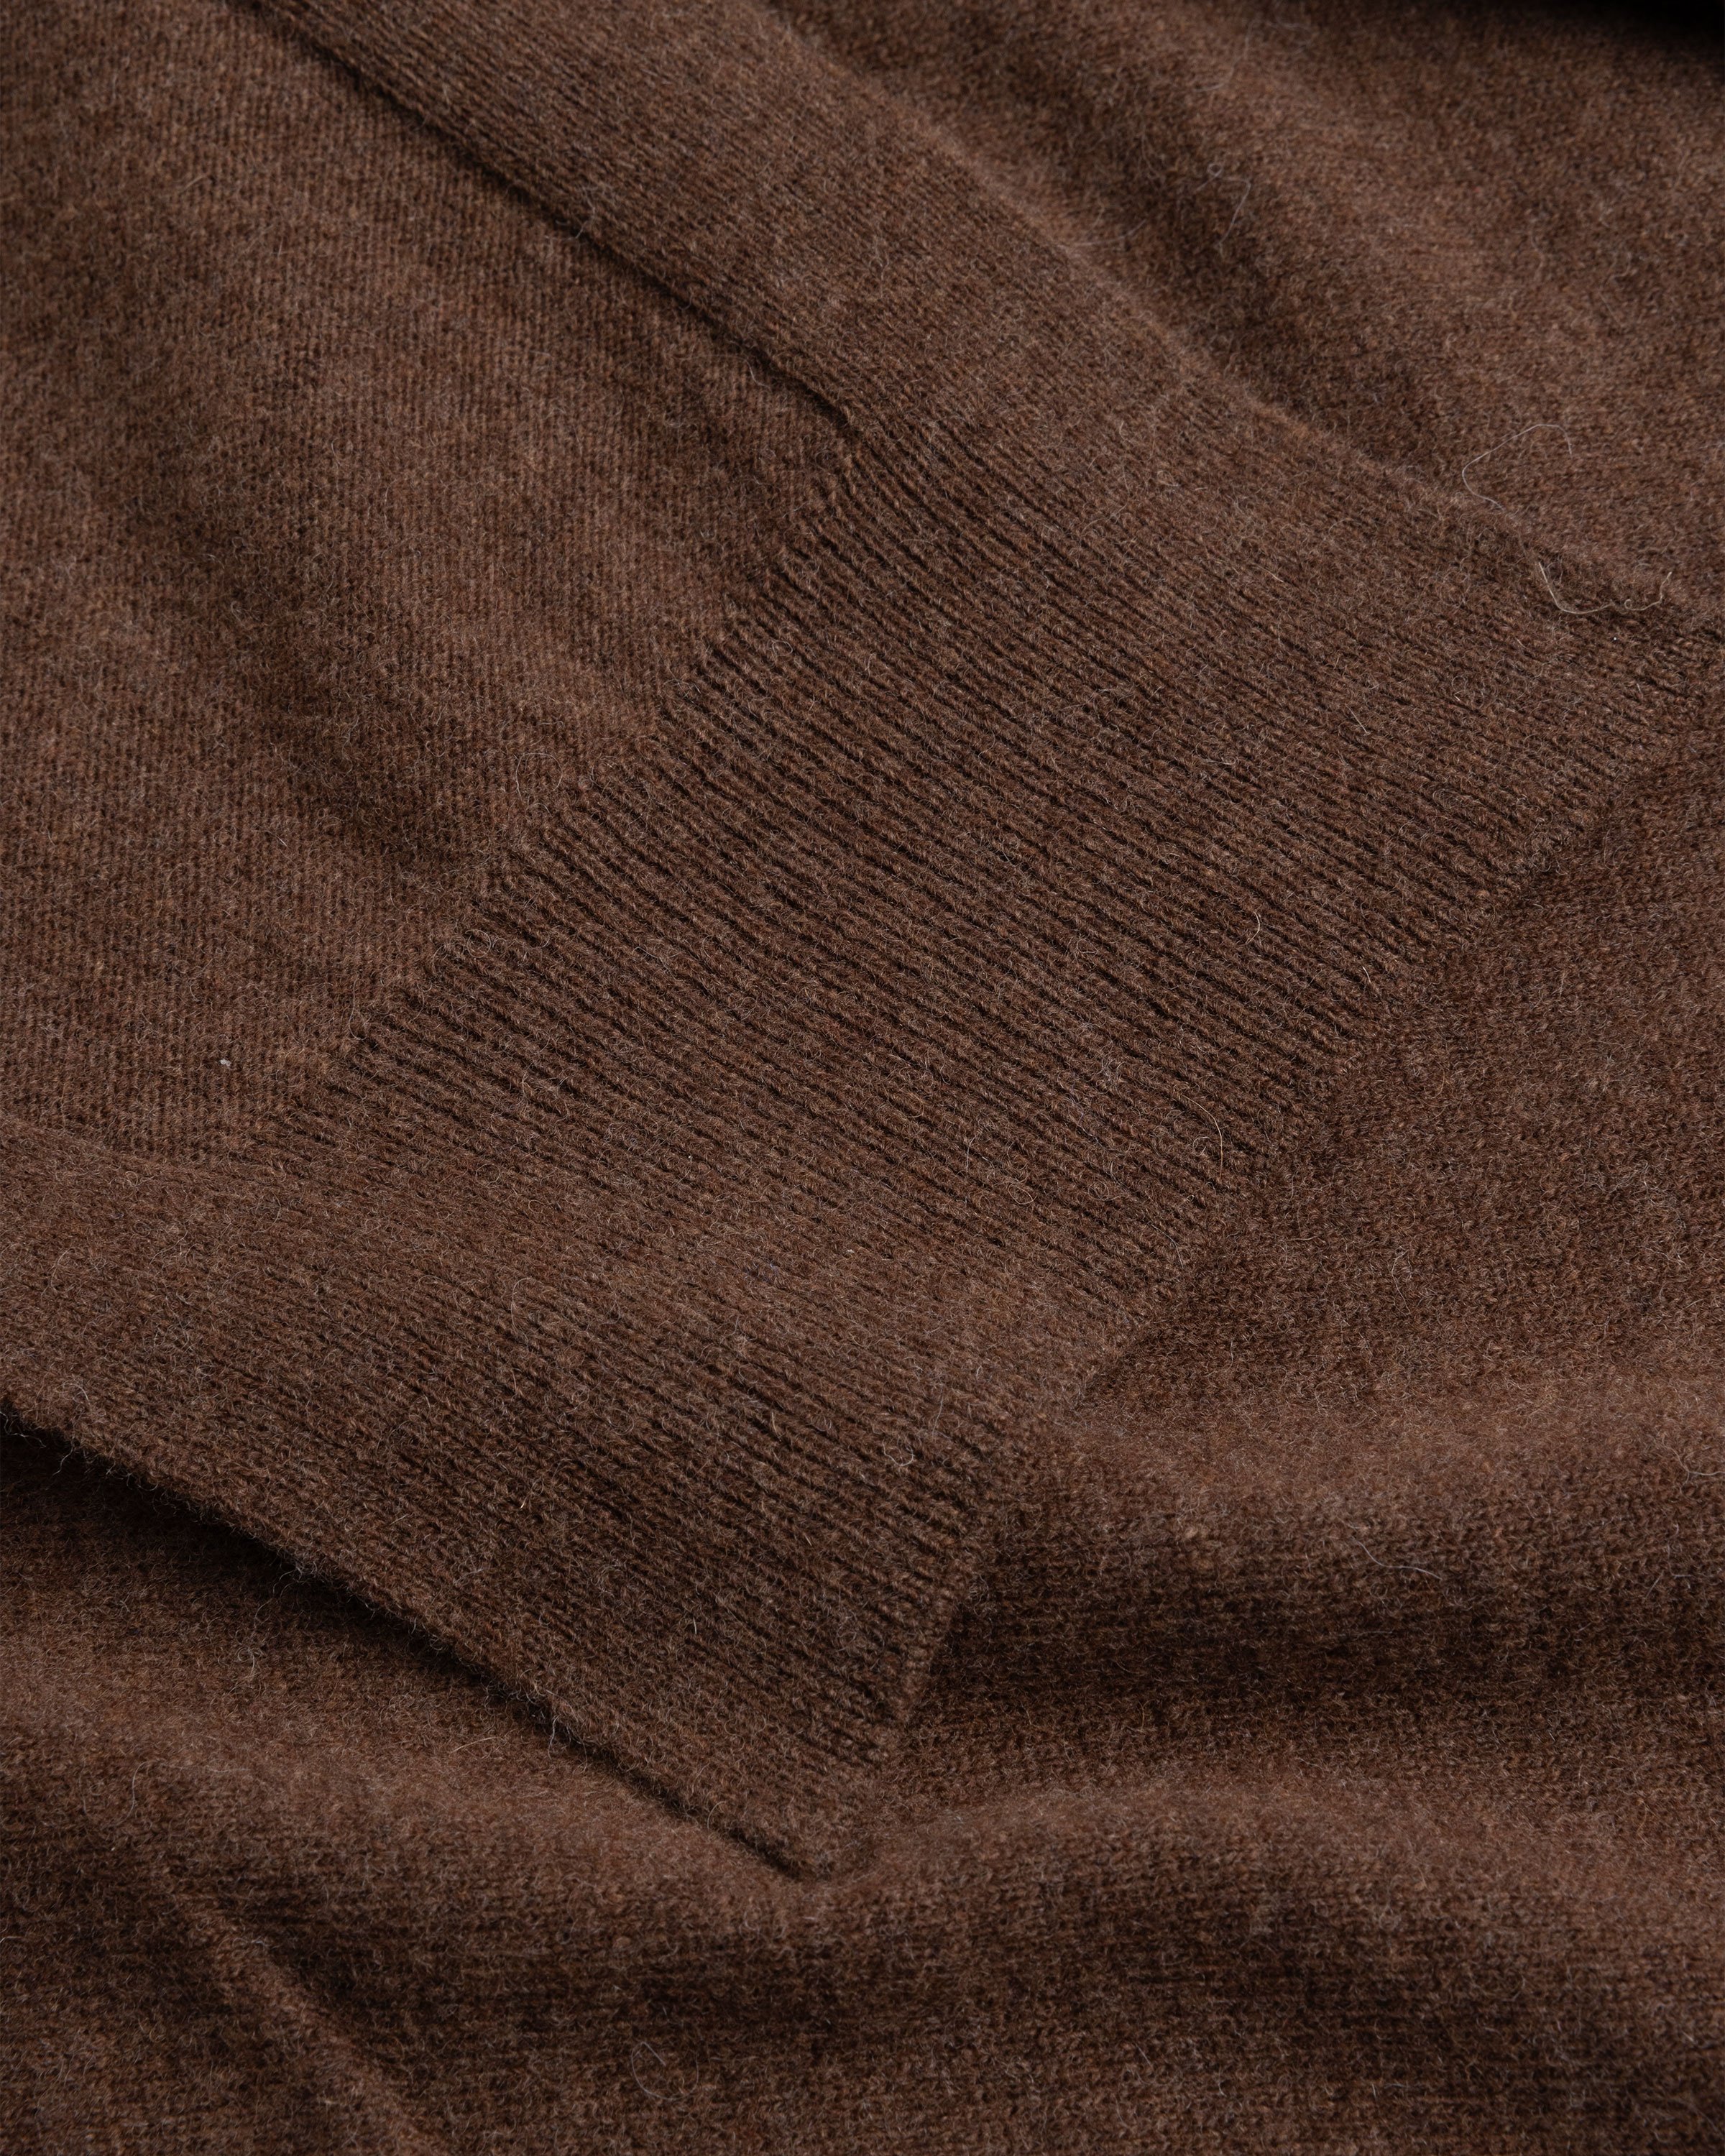 Lemaire - WRAP SCARF - Accessories - Brown - Image 7